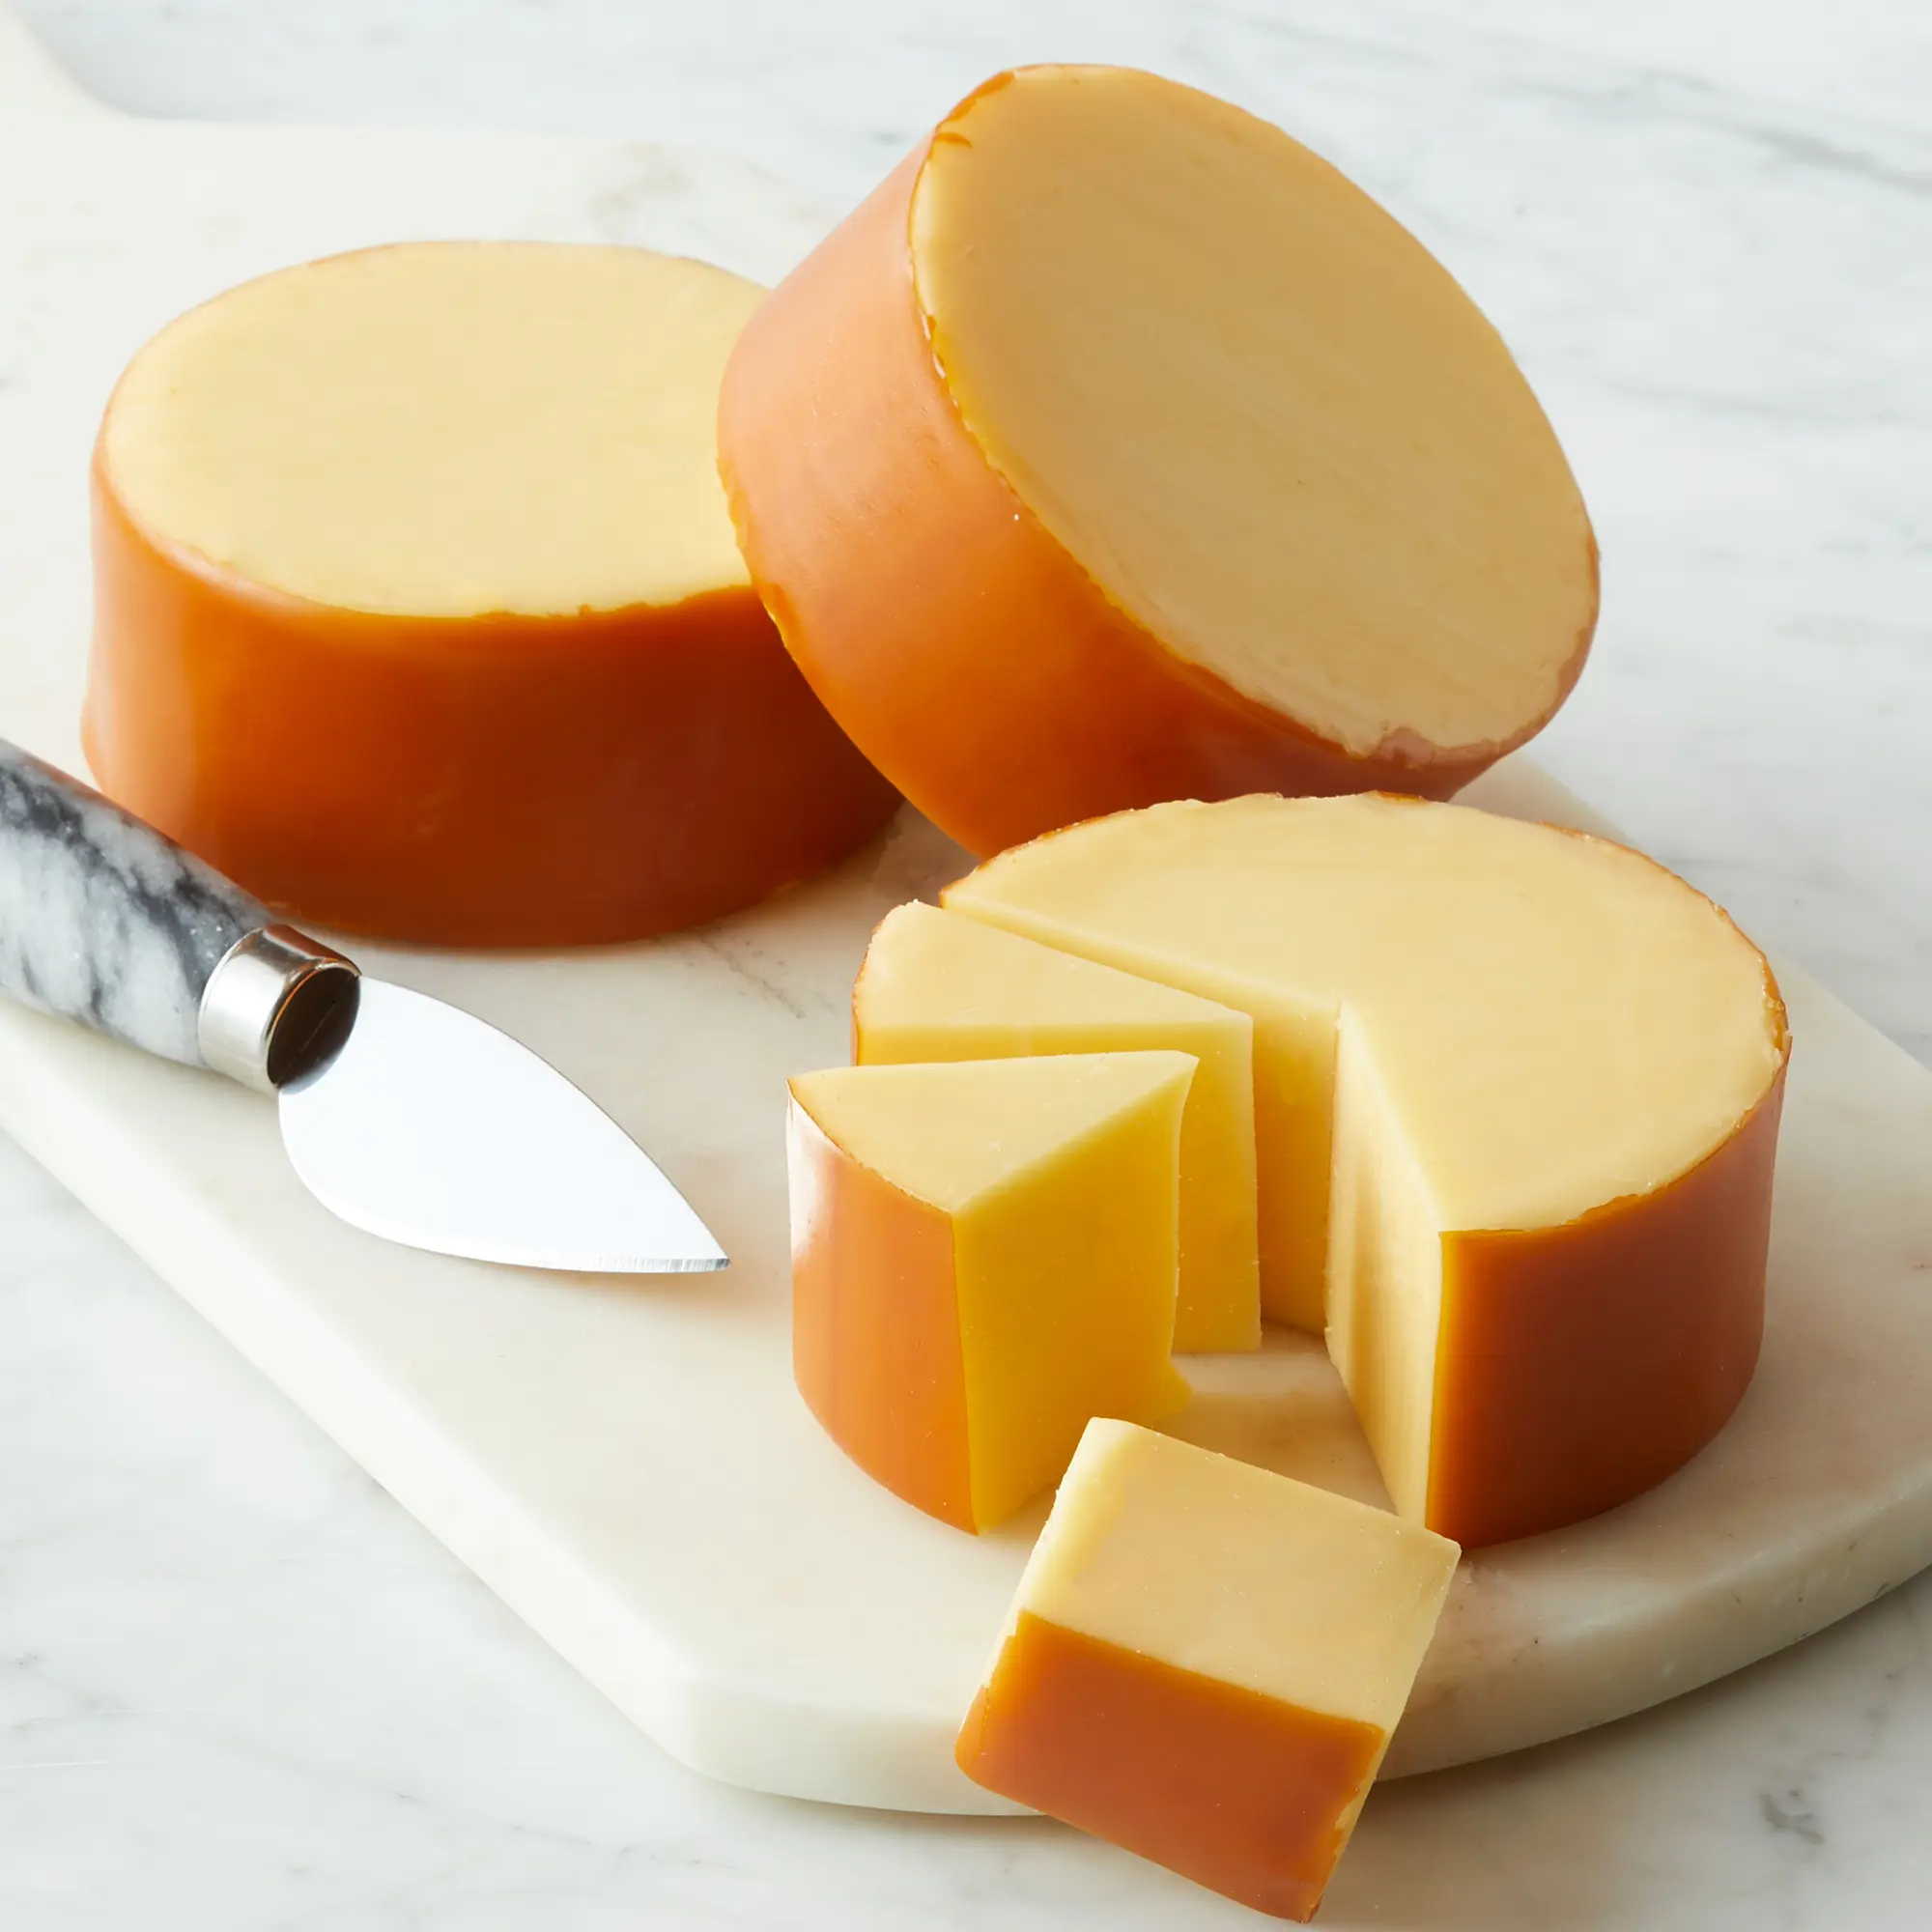 where to buy smoked gouda cheese - Why is Gouda so expensive